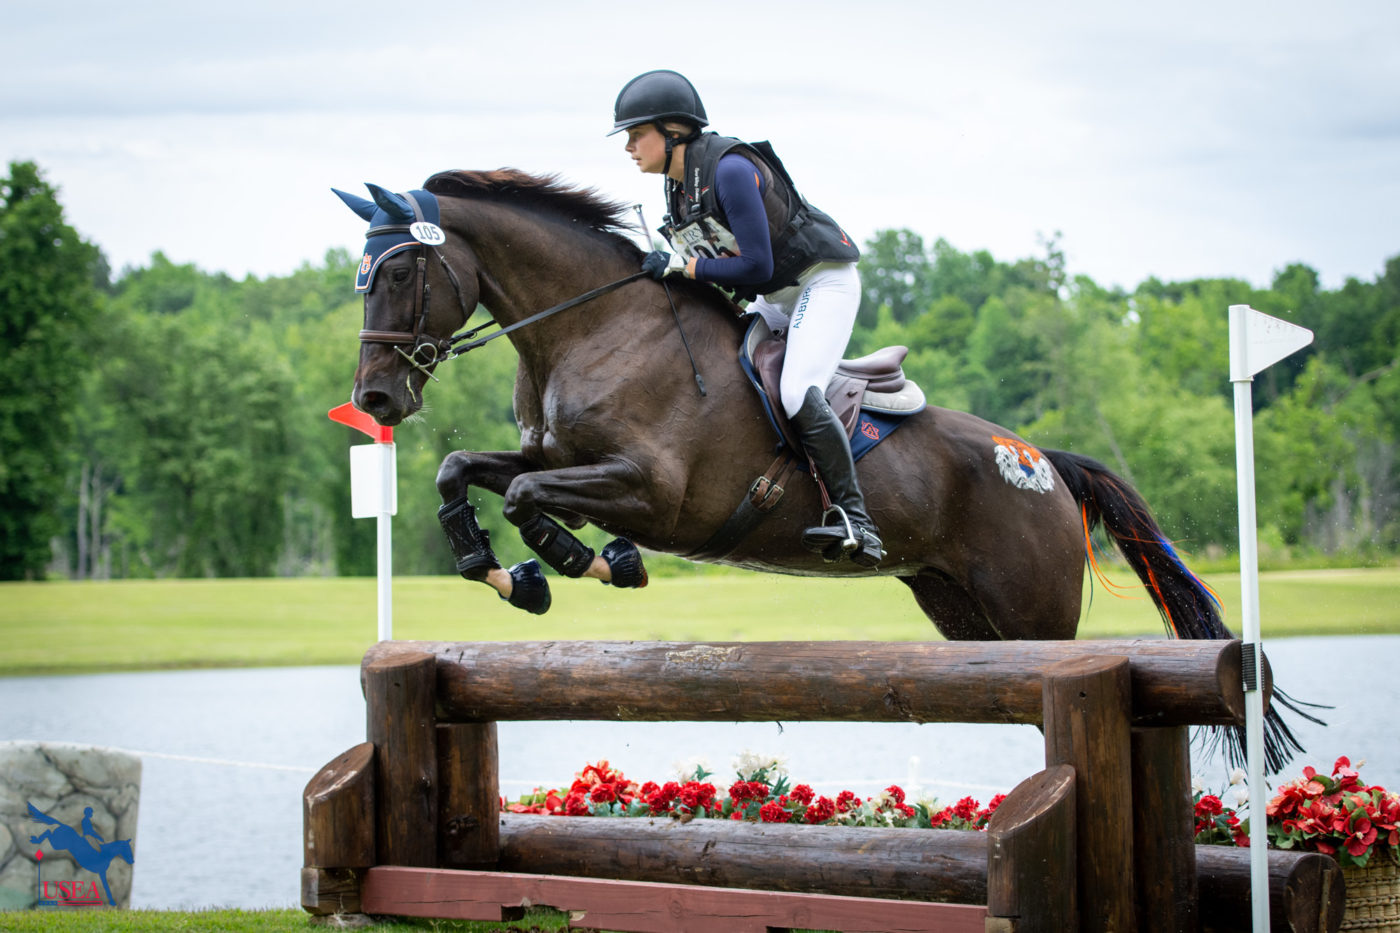 Brinley Von Herbulis and Air Apparent competed for Auburn. USEA/Shelby Allen photo